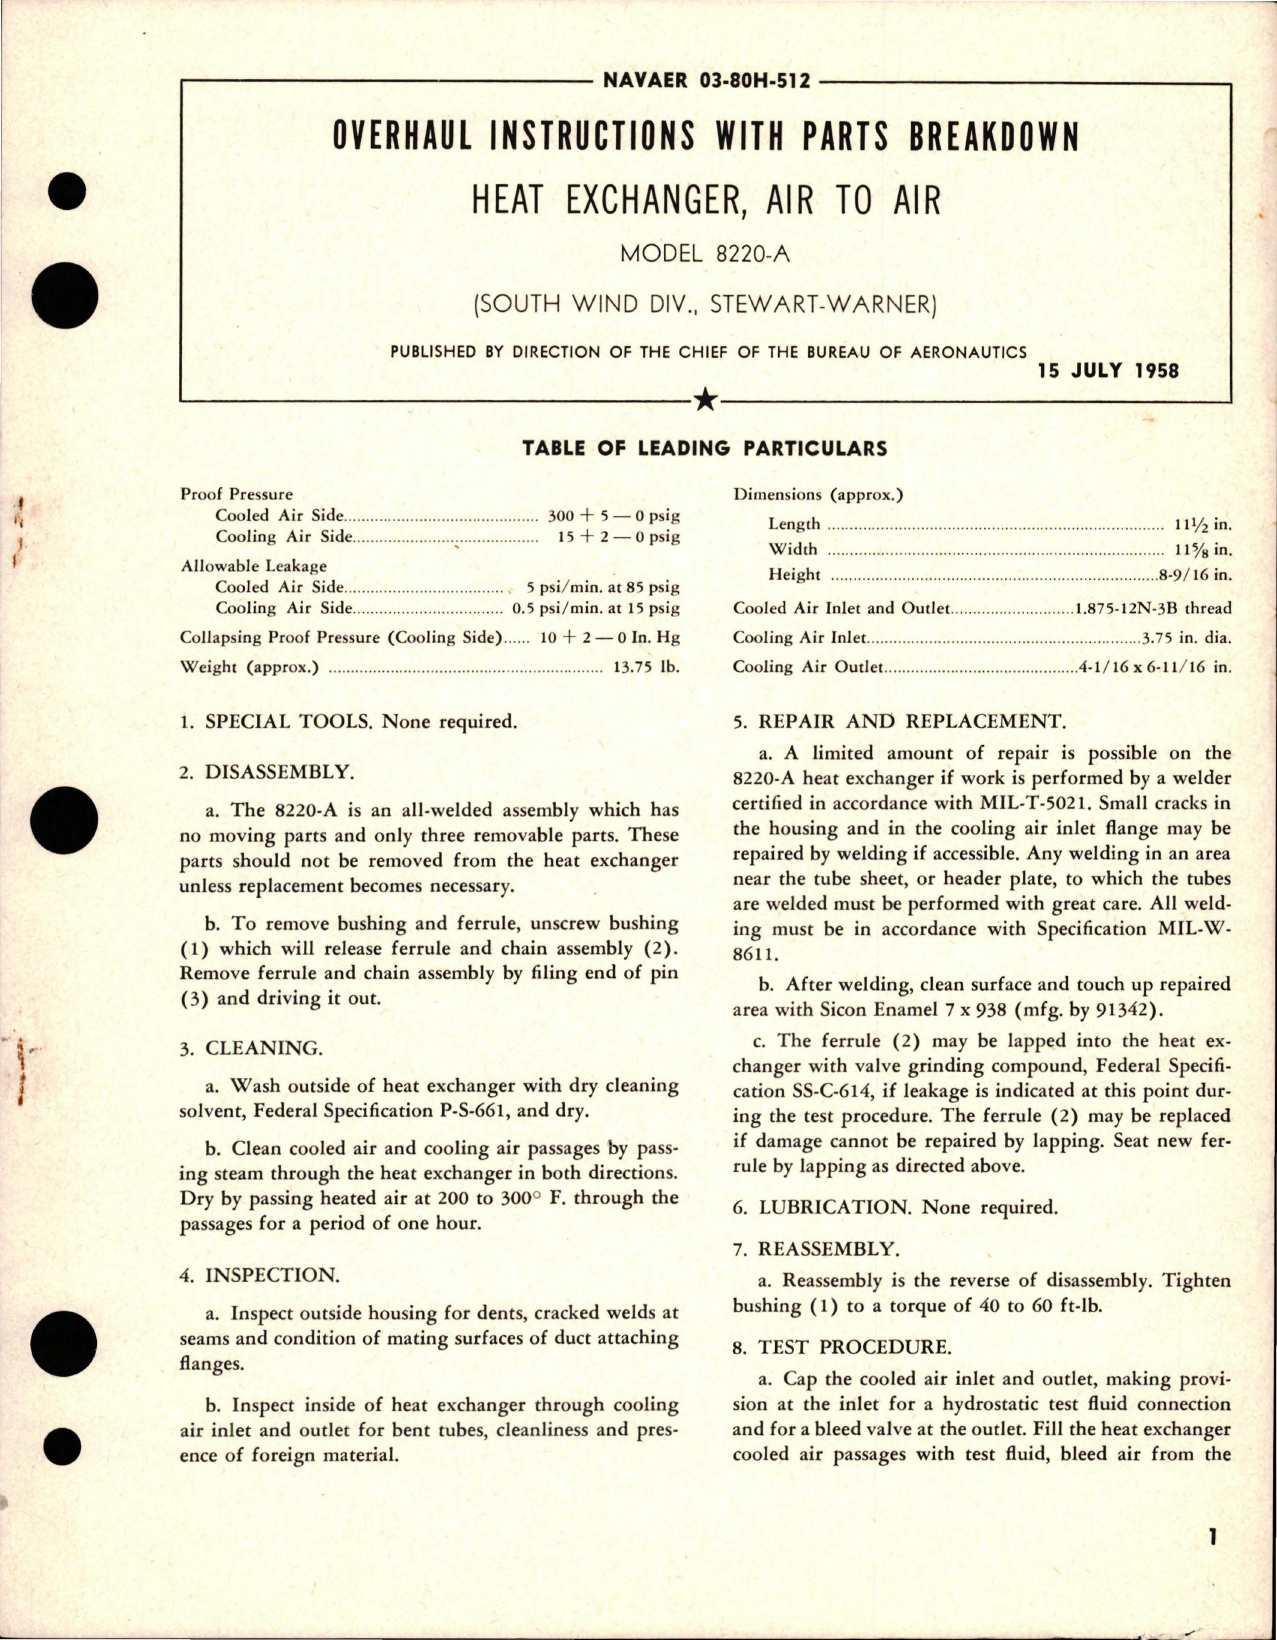 Sample page 1 from AirCorps Library document: Overhaul Instructions with Parts Breakdown for Air to Air Heat Exchanger - Model 8220-A